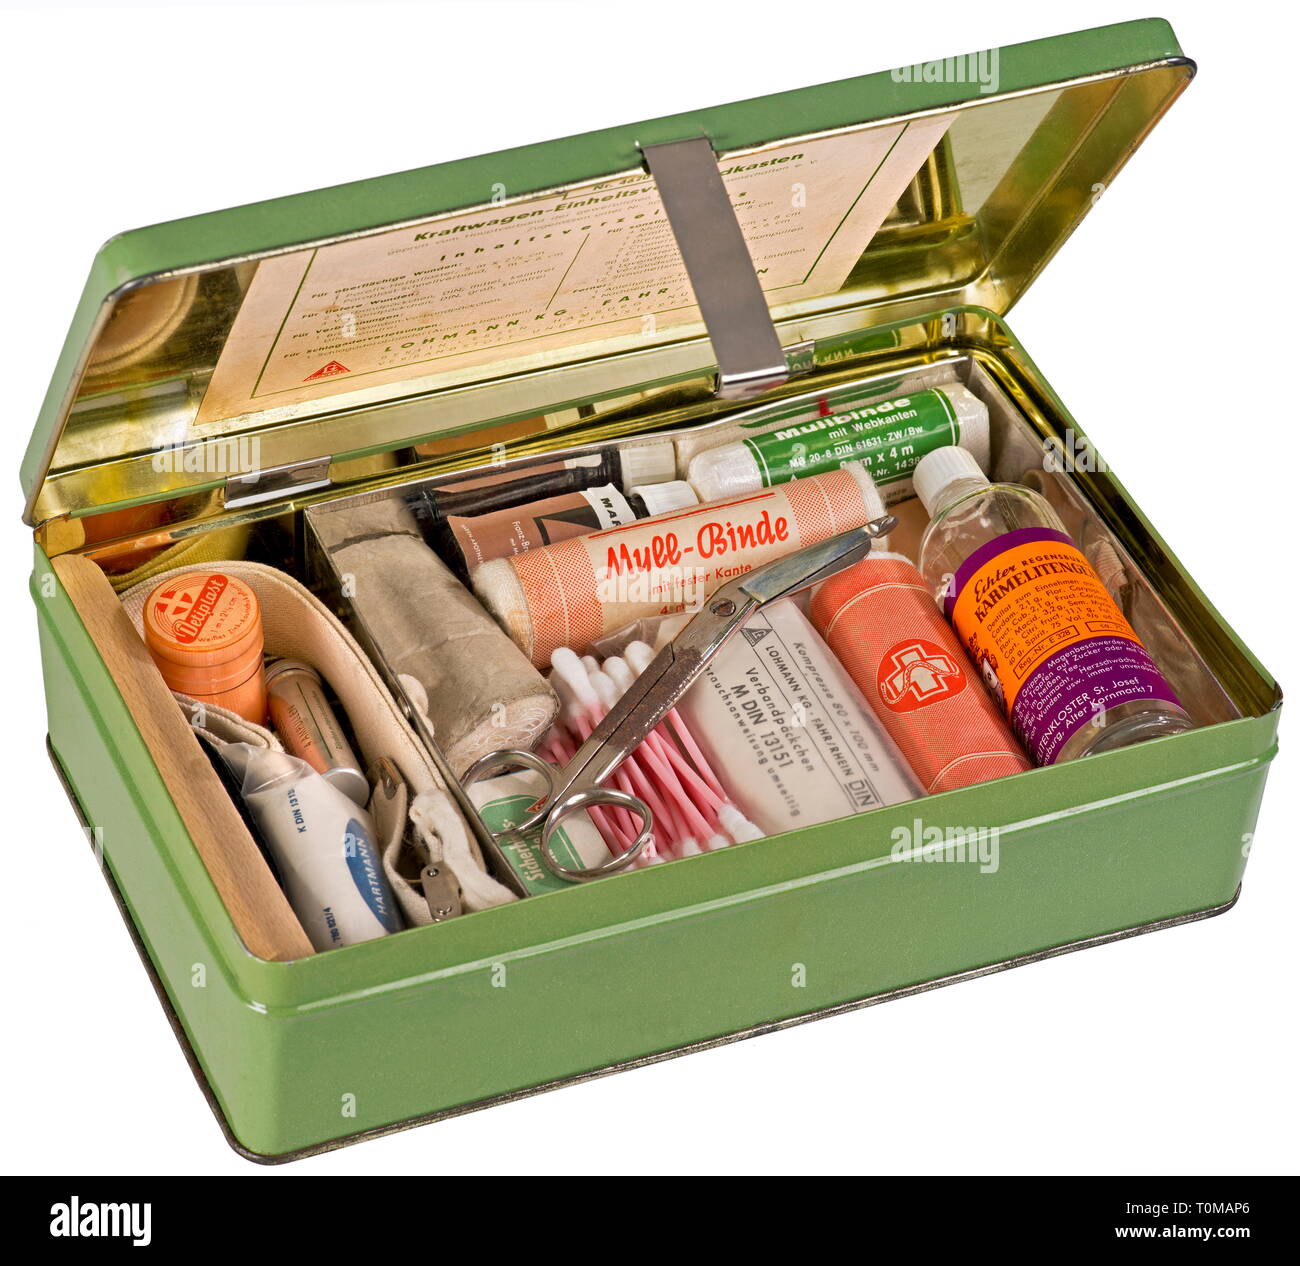 https://c8.alamy.com/comp/T0MAP6/advertising-car-automobile-unitary-medical-kit-standardized-first-aid-box-for-driver-made-by-lohmann-kg-fahr-rhine-germany-circa-1959-additional-rights-clearance-info-not-available-T0MAP6.jpg